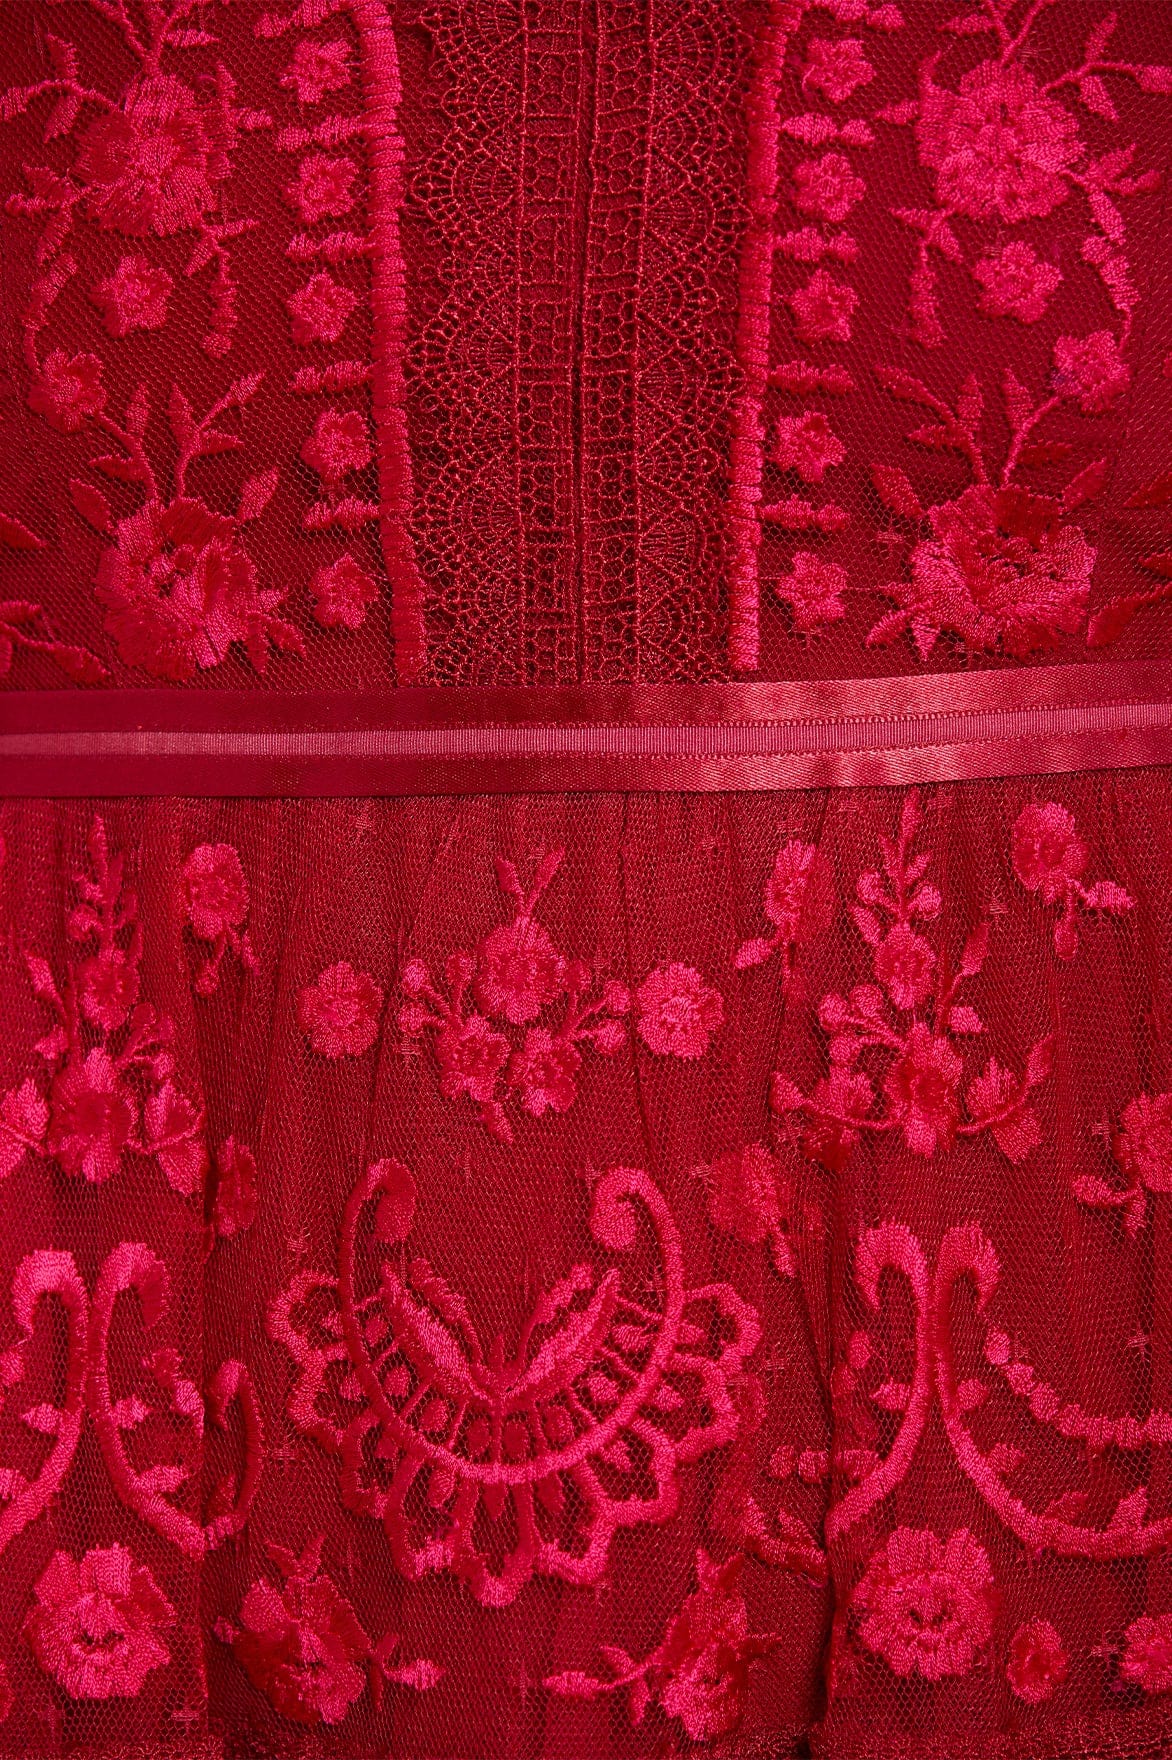 Red lace fabric